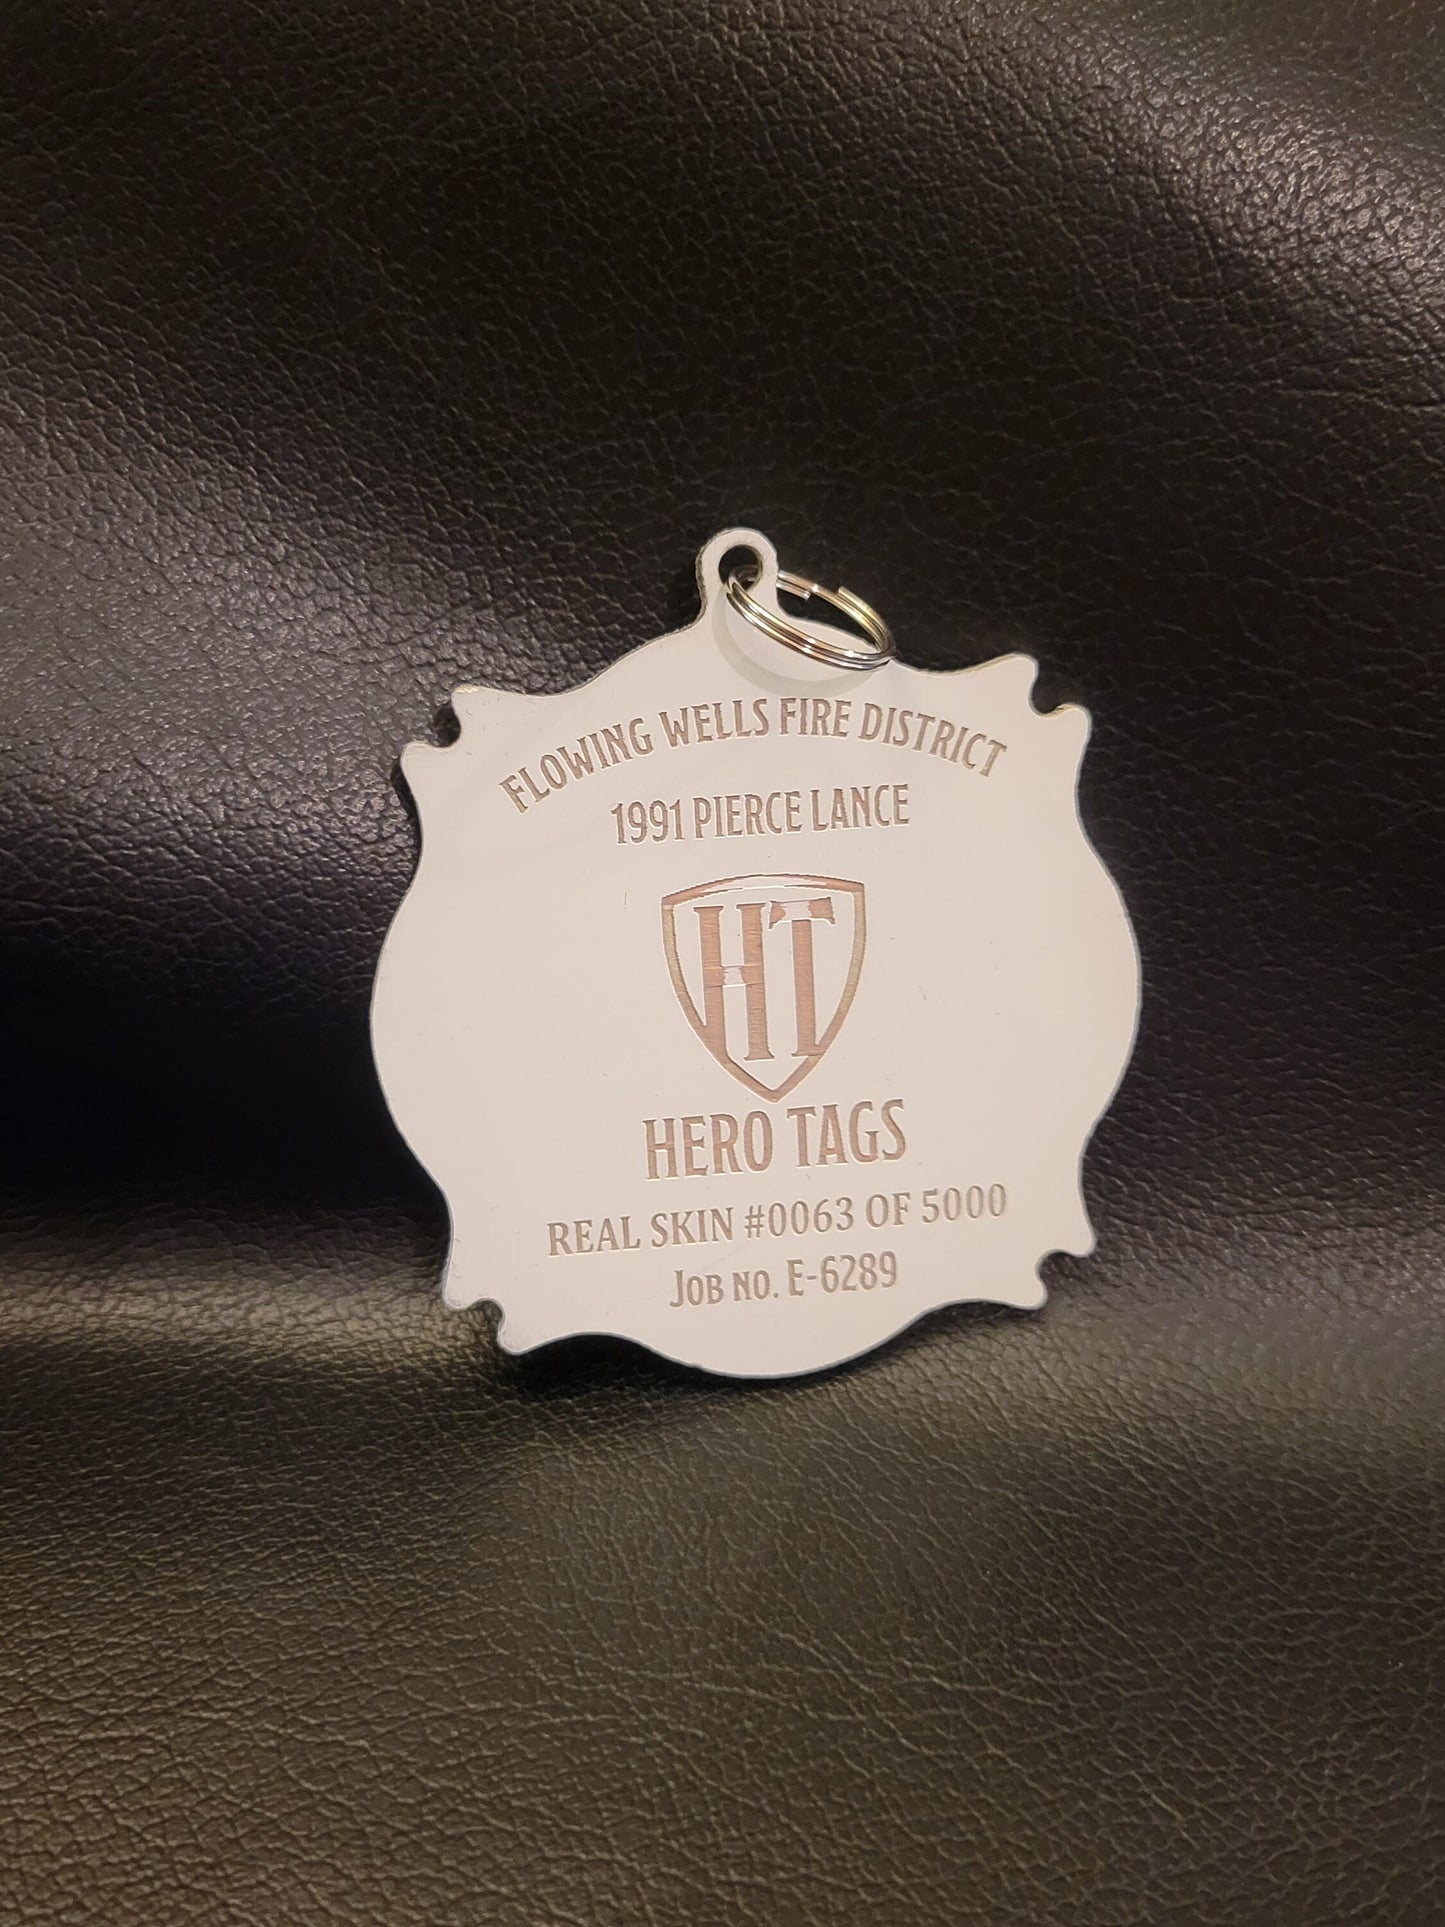 Hero tags real skin from a real fire truck "White aluminum" Tag